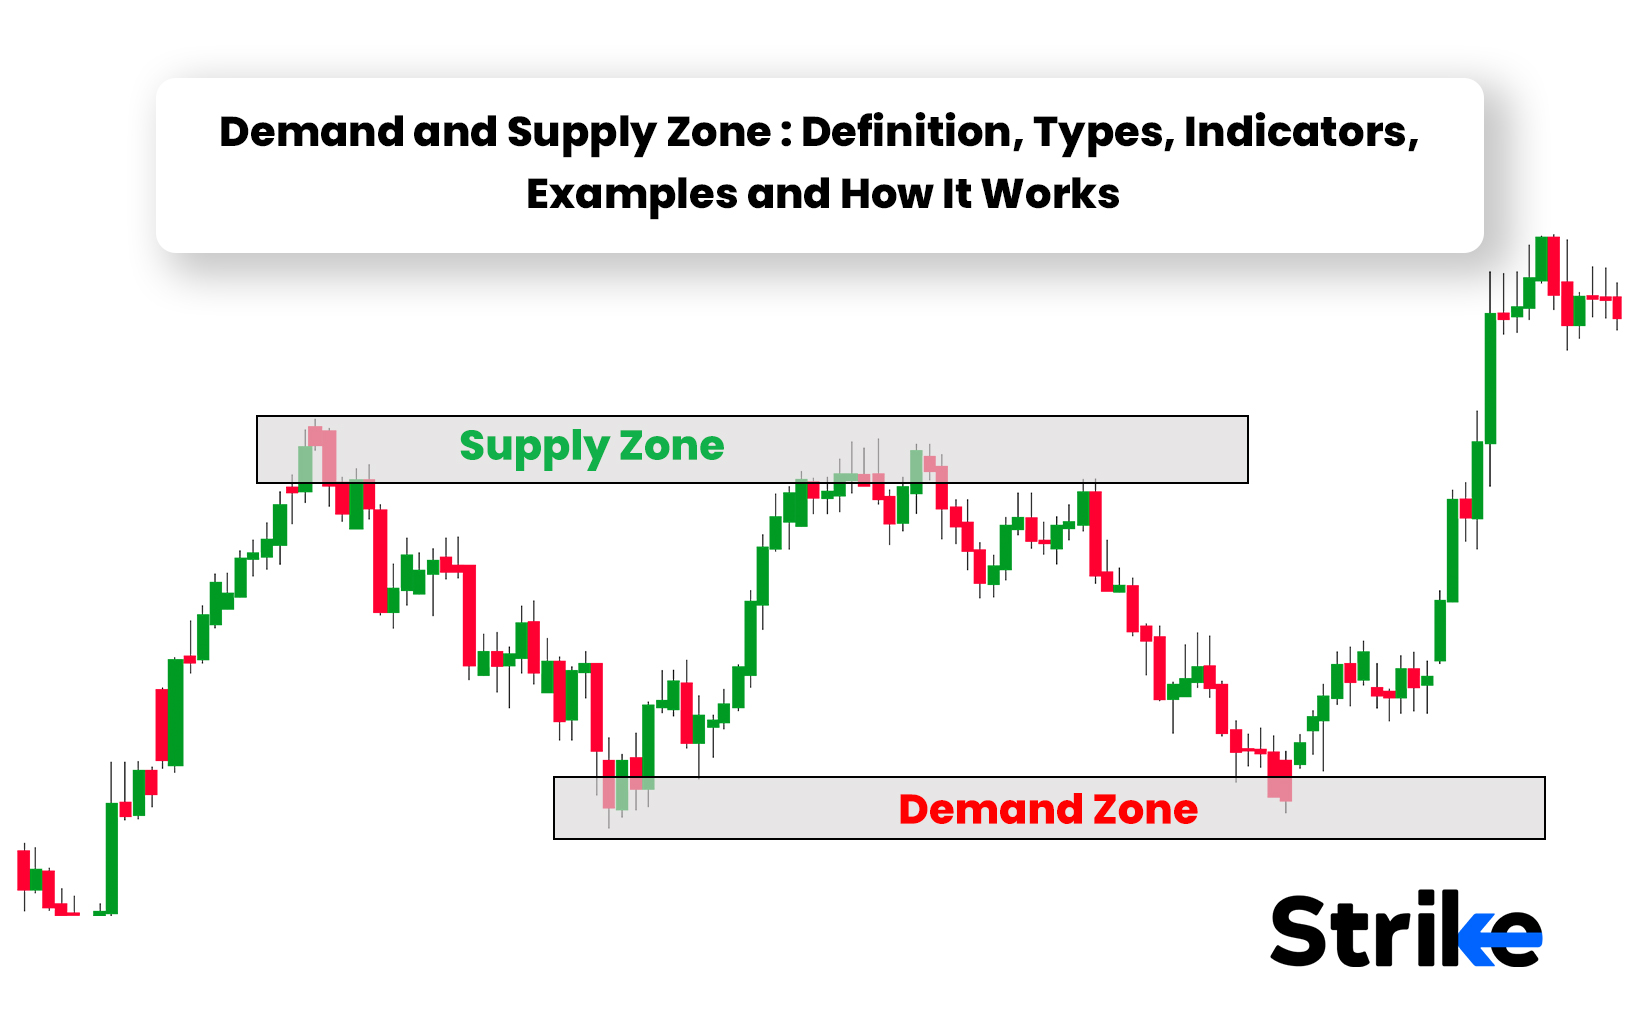 Demand and Supply Zone: Definition, Types, Indicators, Examples and How It Works